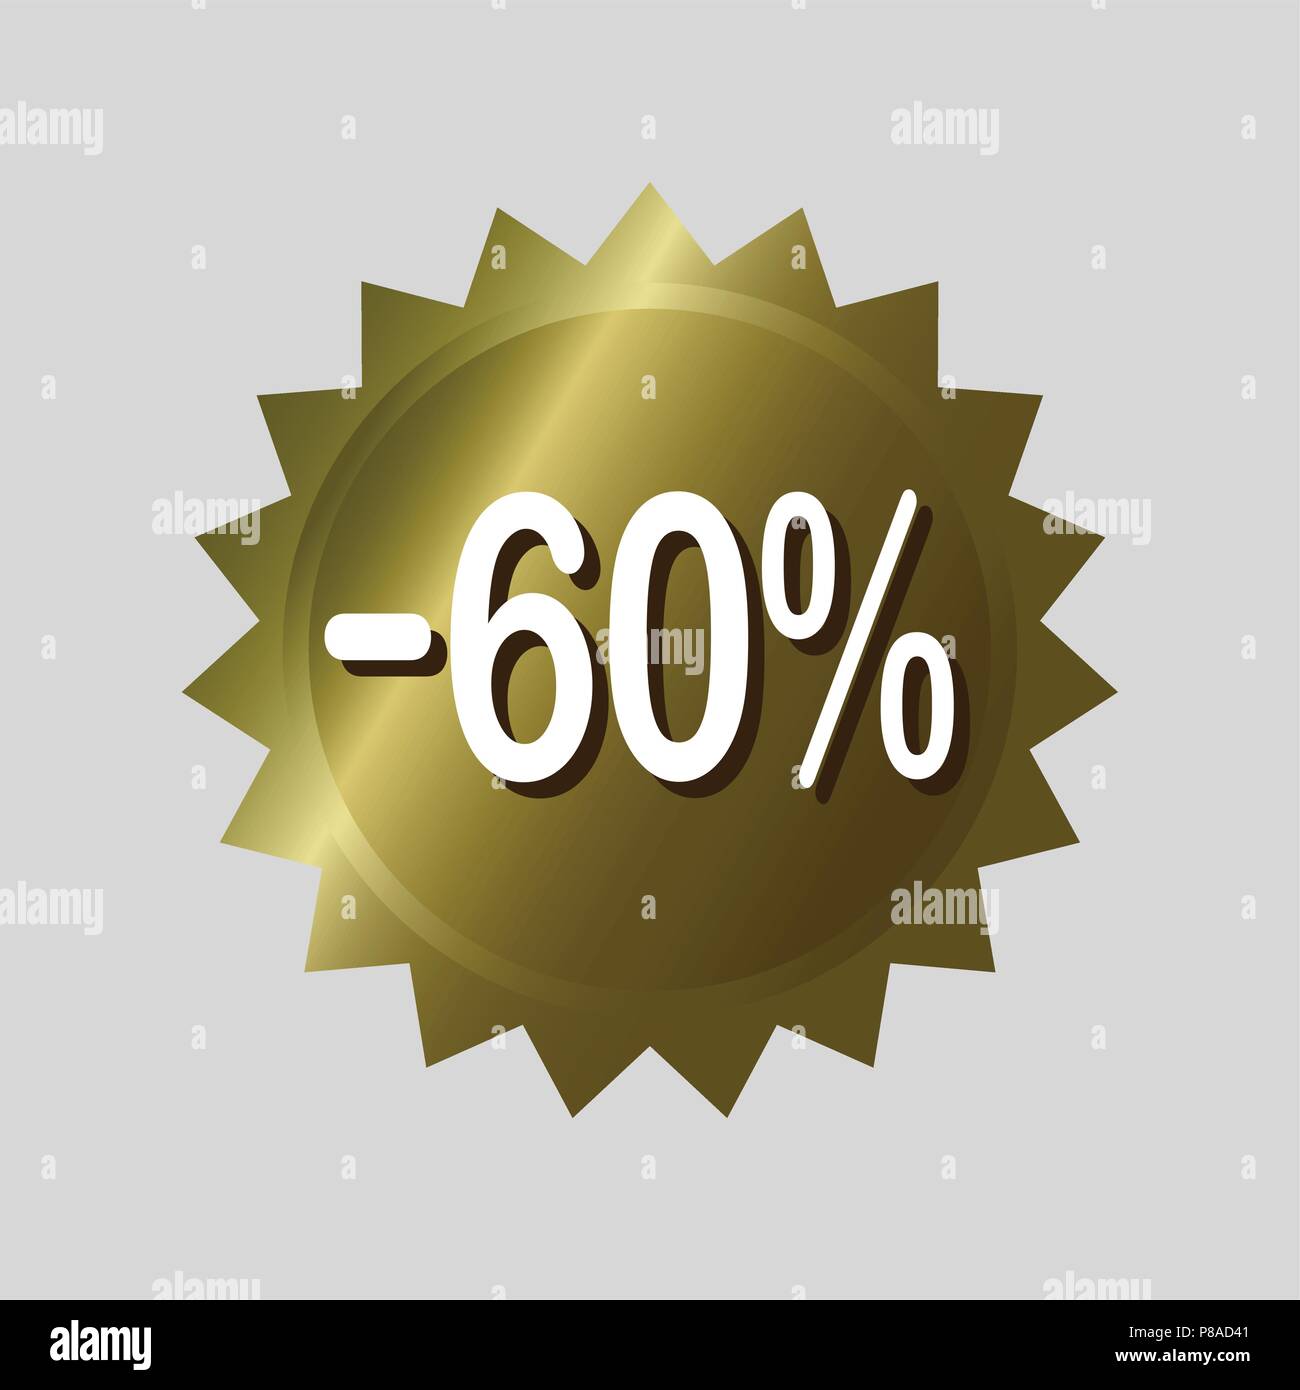 Price tag, '60% off' discount sticker. Golden vector label design on isolated background. Stock Vector